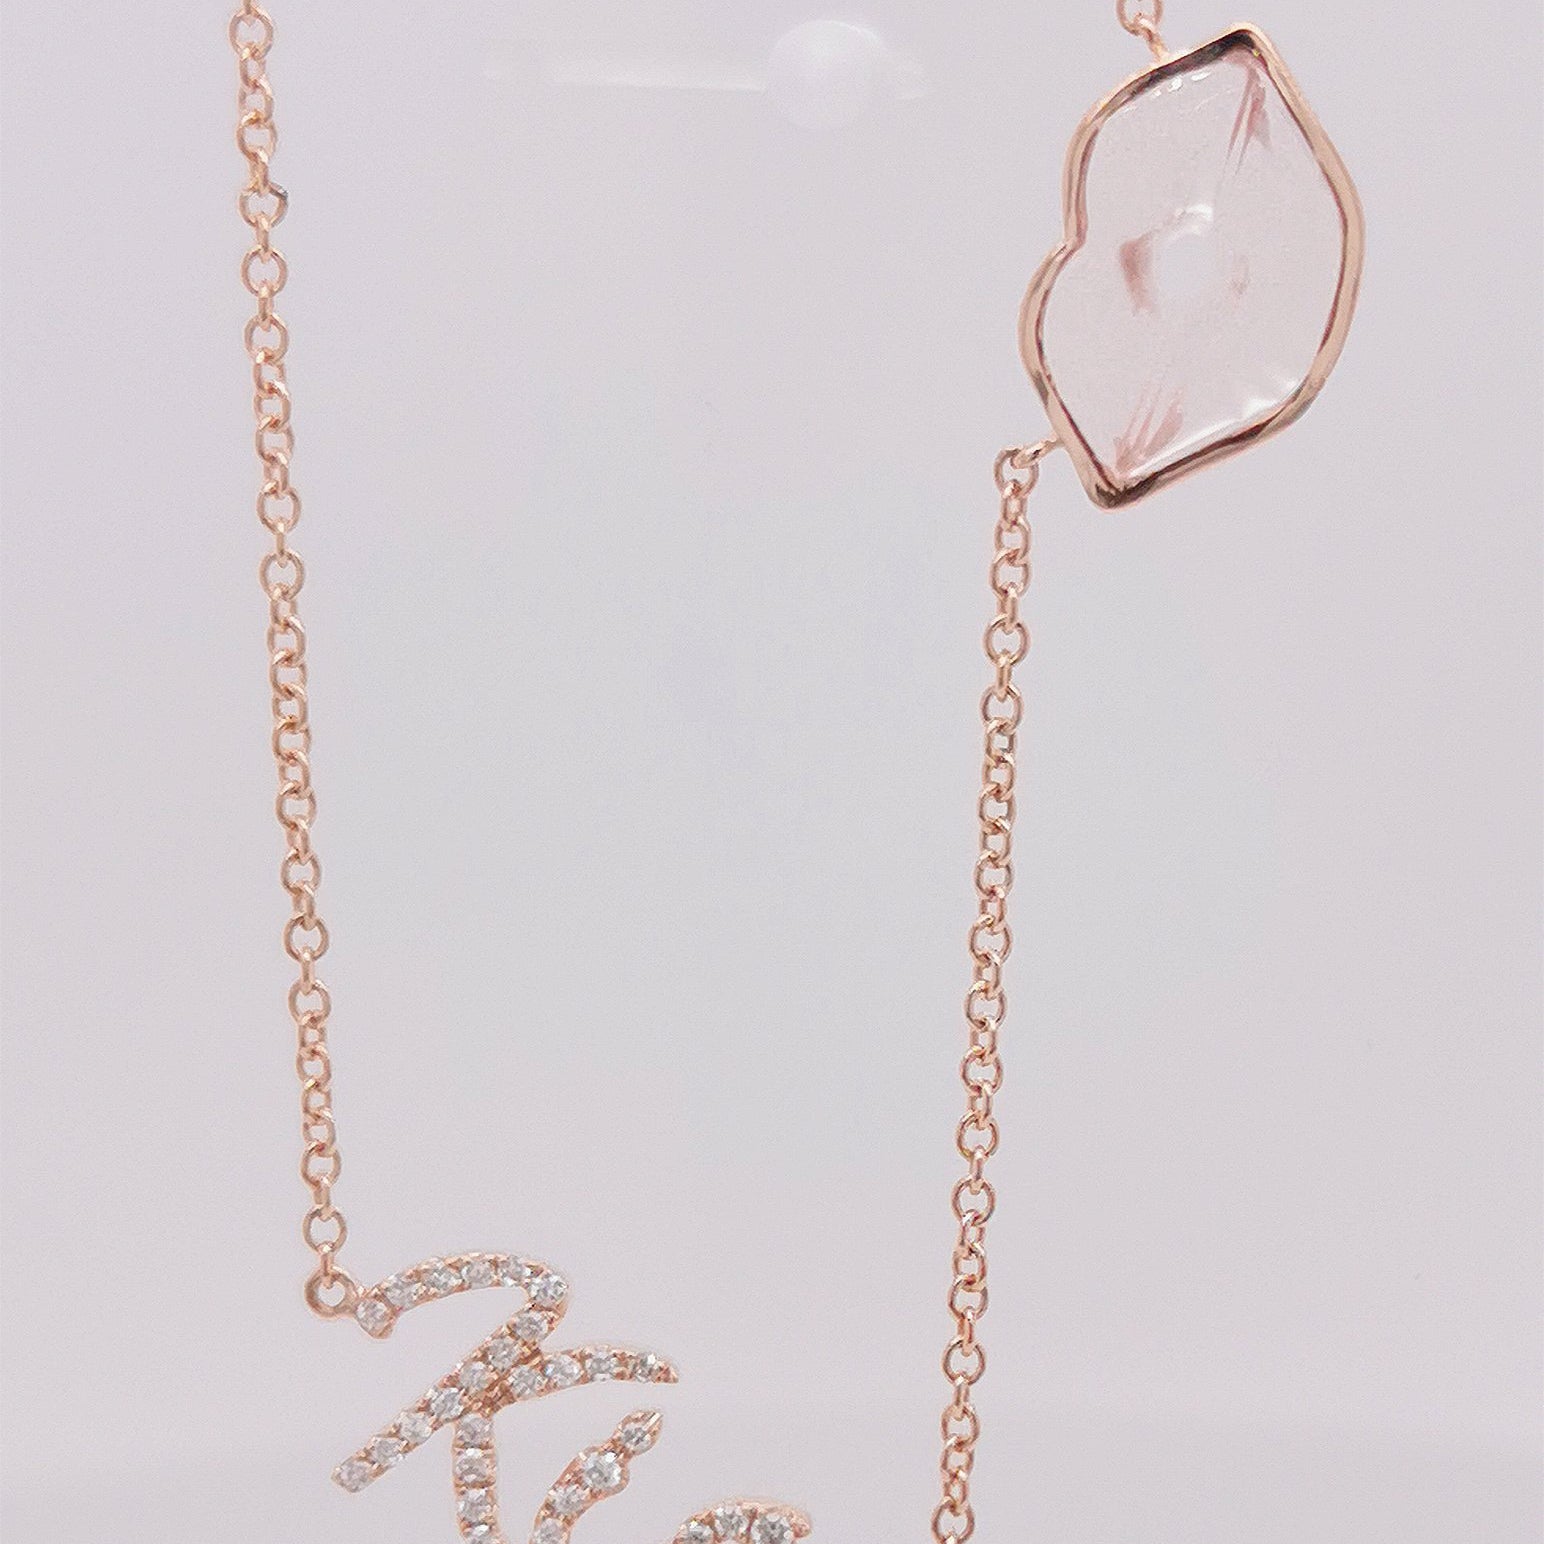 "Kiss" 18K gold necklace